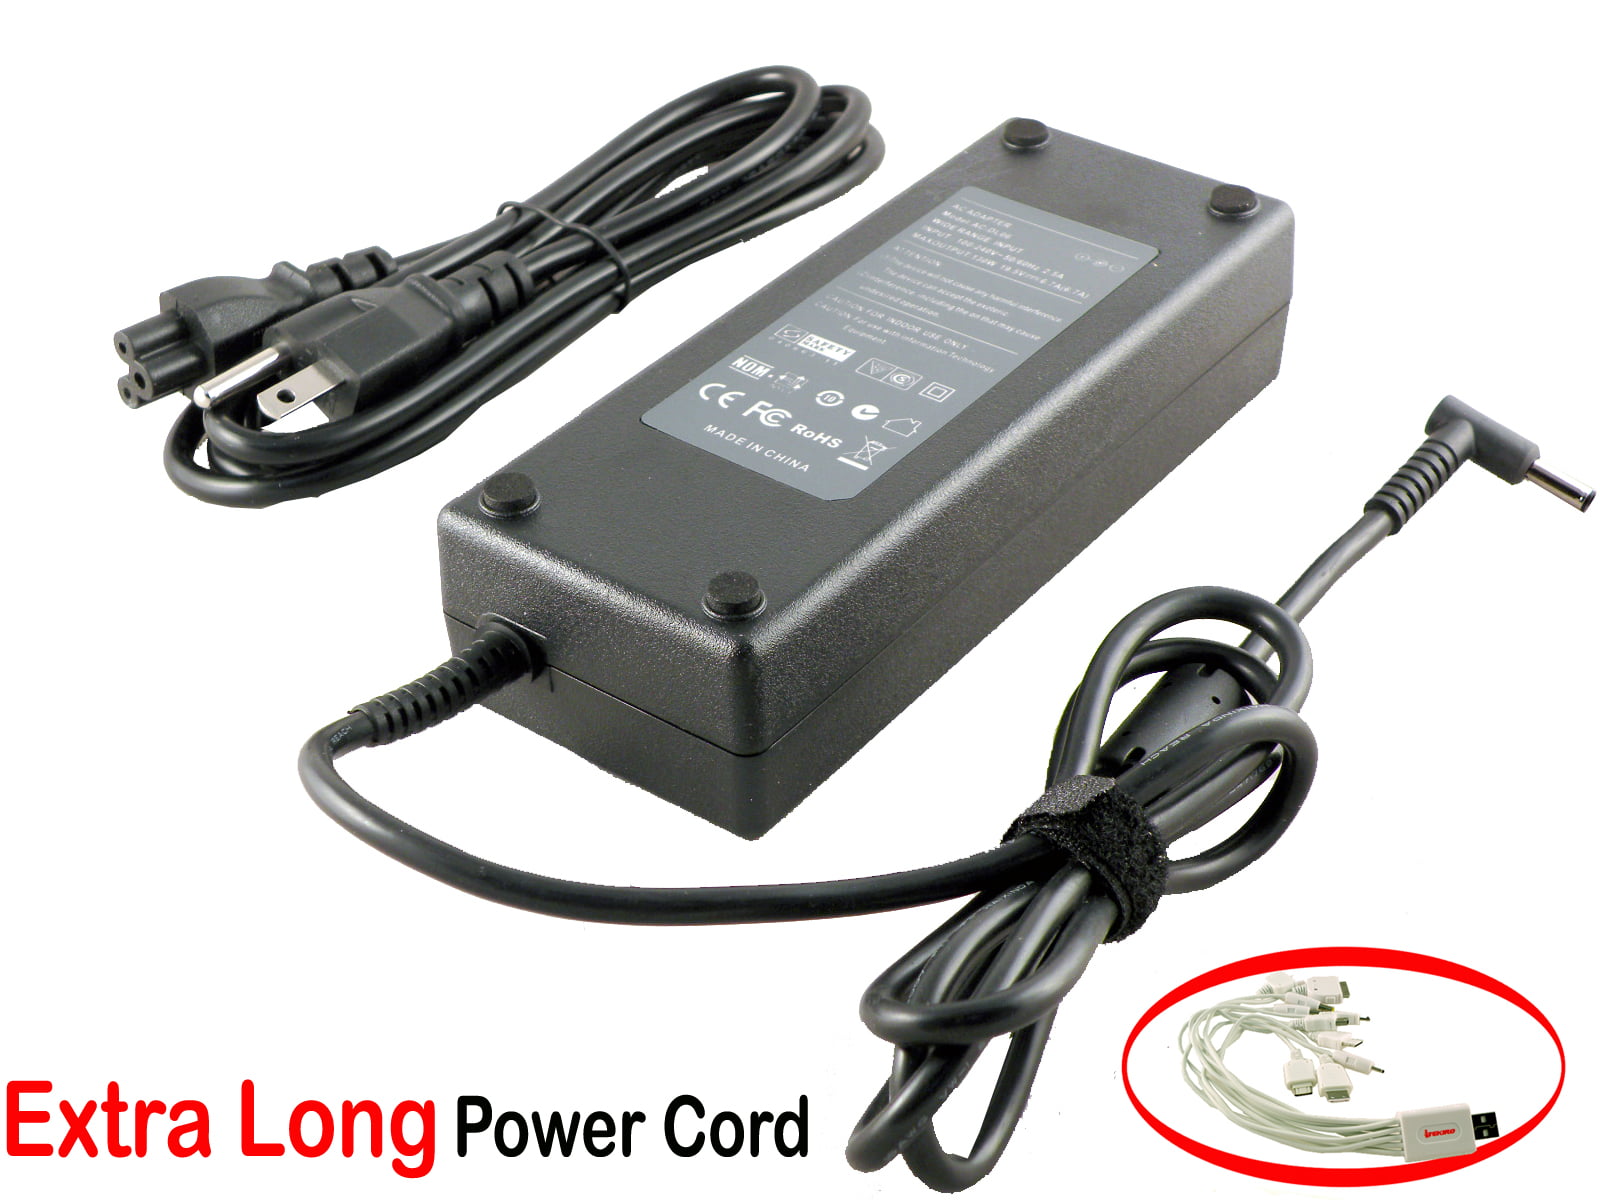 New 130W AC Charger for Dell XPS 15 9530 9550 9560 7590 DA130PM130 LA130PM130 Laptop AC Adapter Power Supply Cord